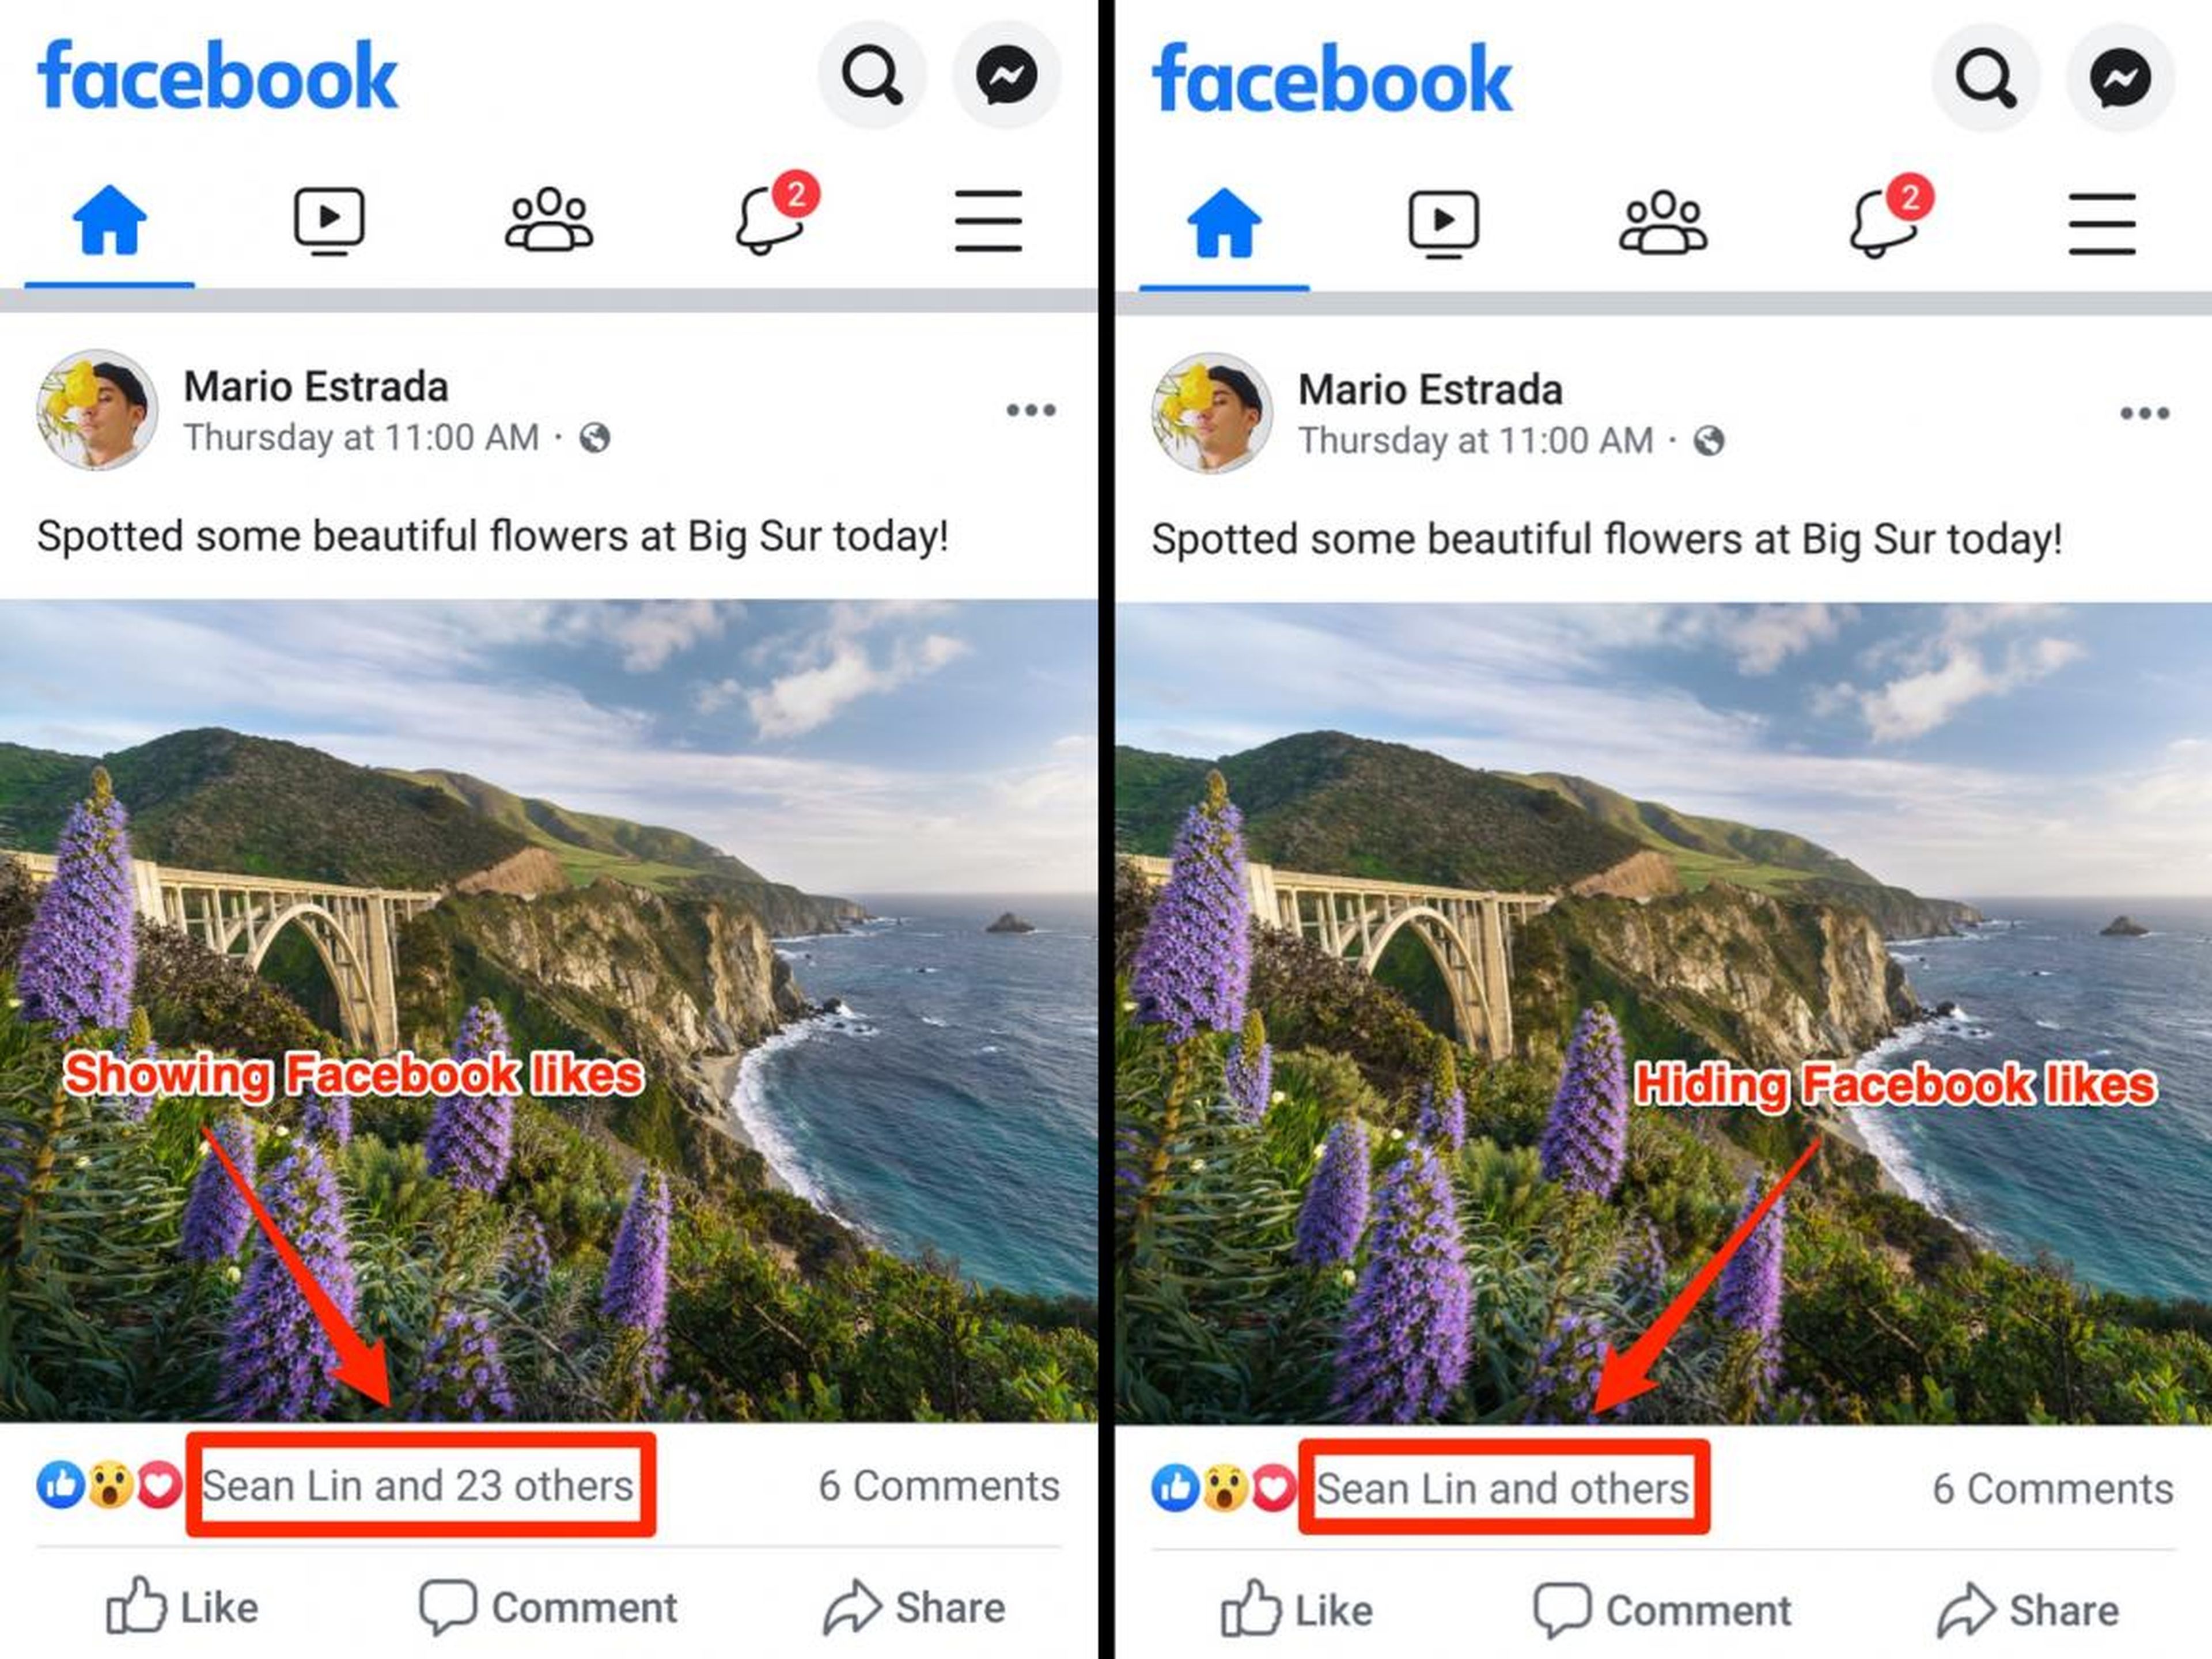 Following in the footsteps of Instagram, Facebook is testing hiding likes starting this week